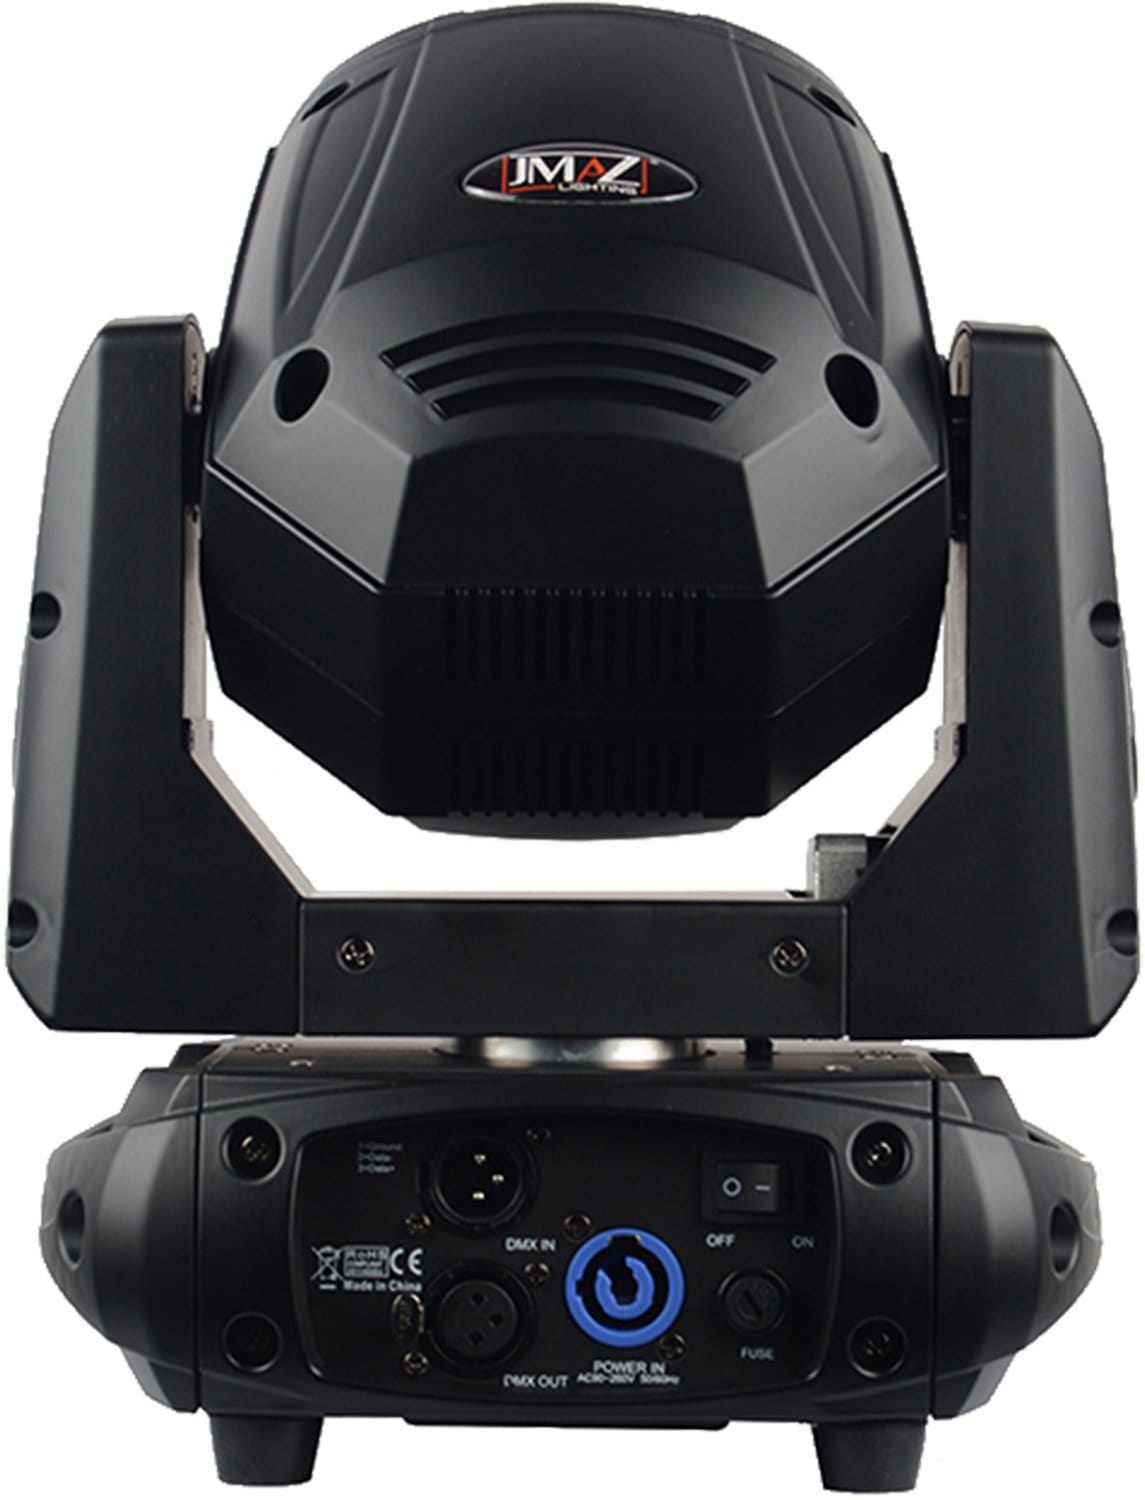 JMAZ Attco Spot 100 LED Moving Head 75W - ProSound and Stage Lighting